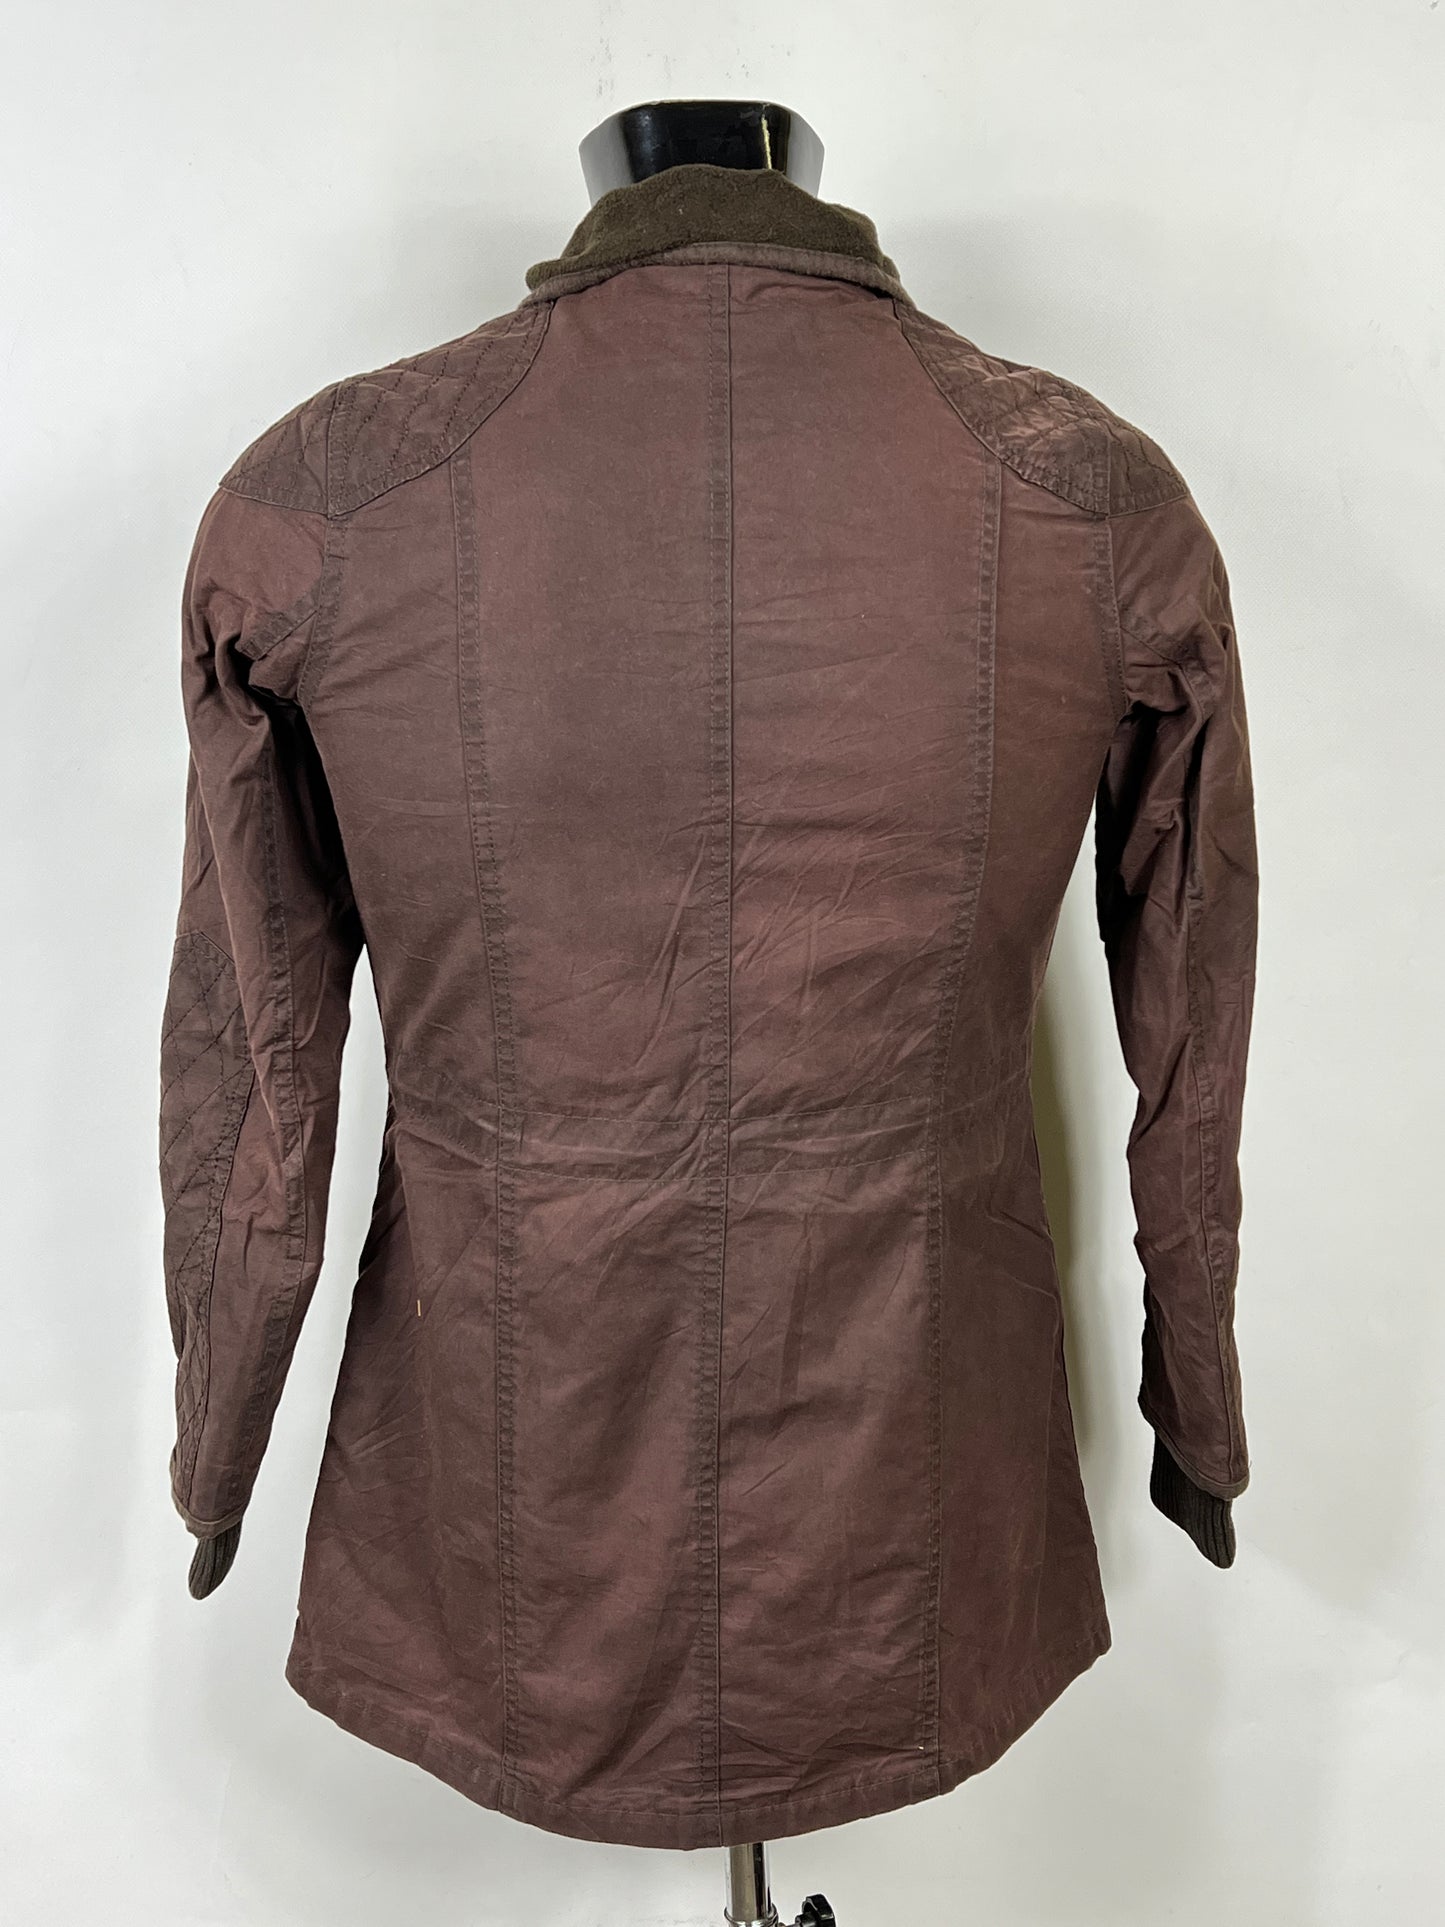 Giacca Barbour Donna Marrone cerata Small UK10 International Brown Wax Lady Jacket